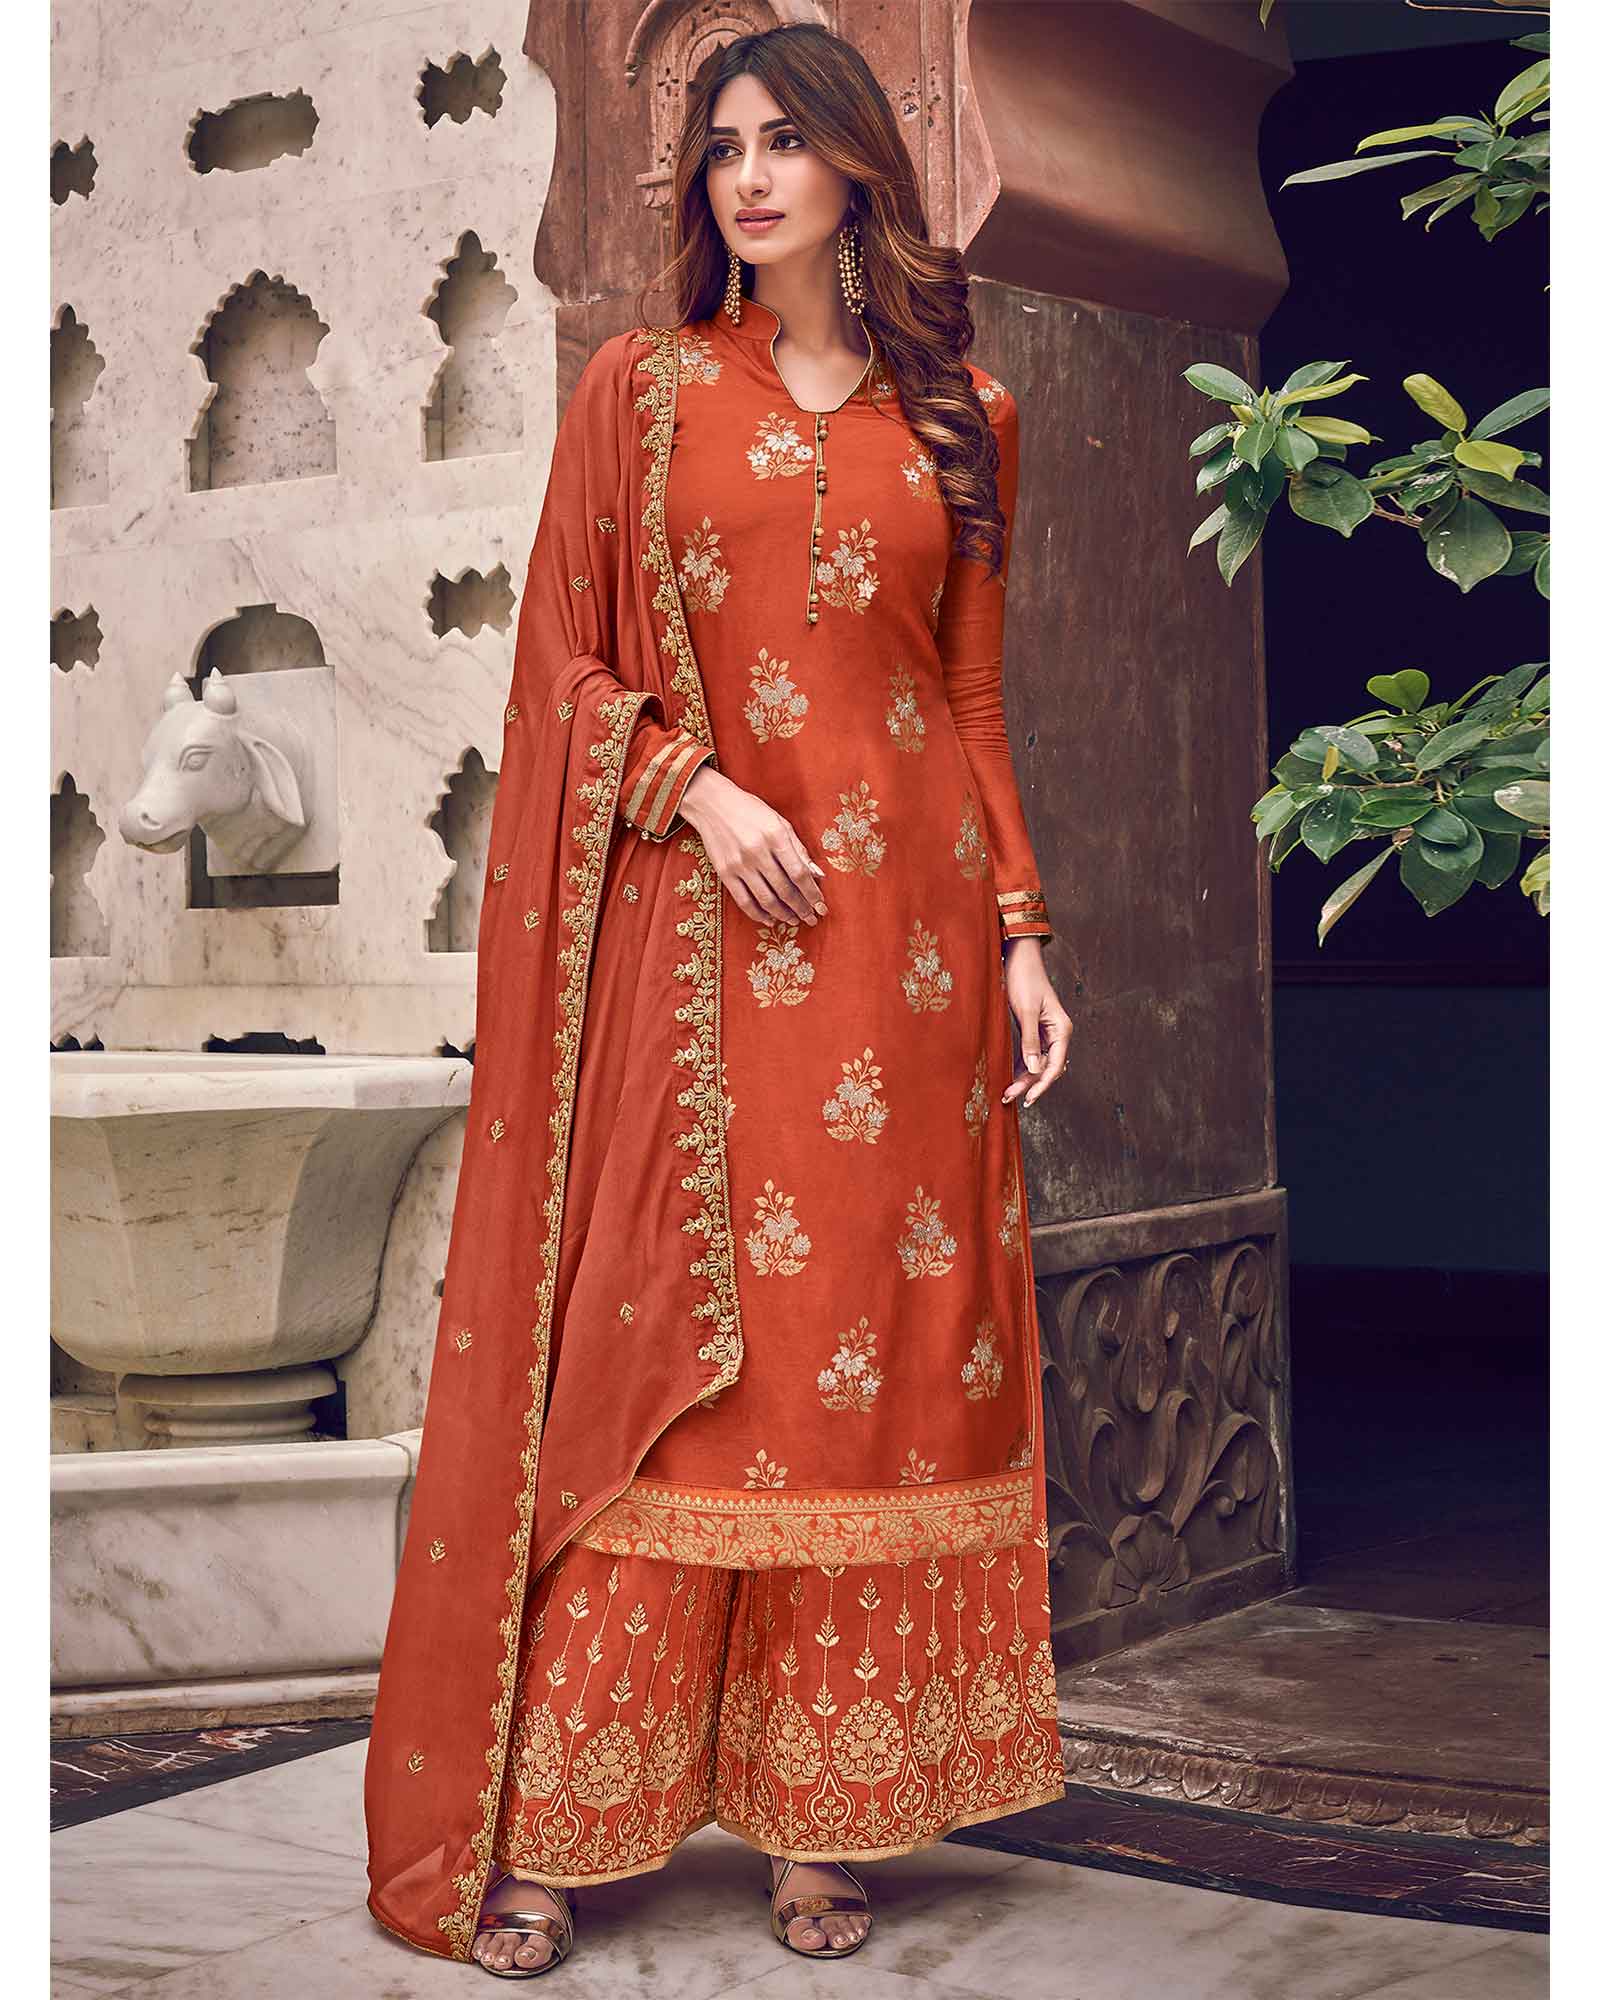 Ravishing Orange Colored Party Wear Embroidered Dress Material